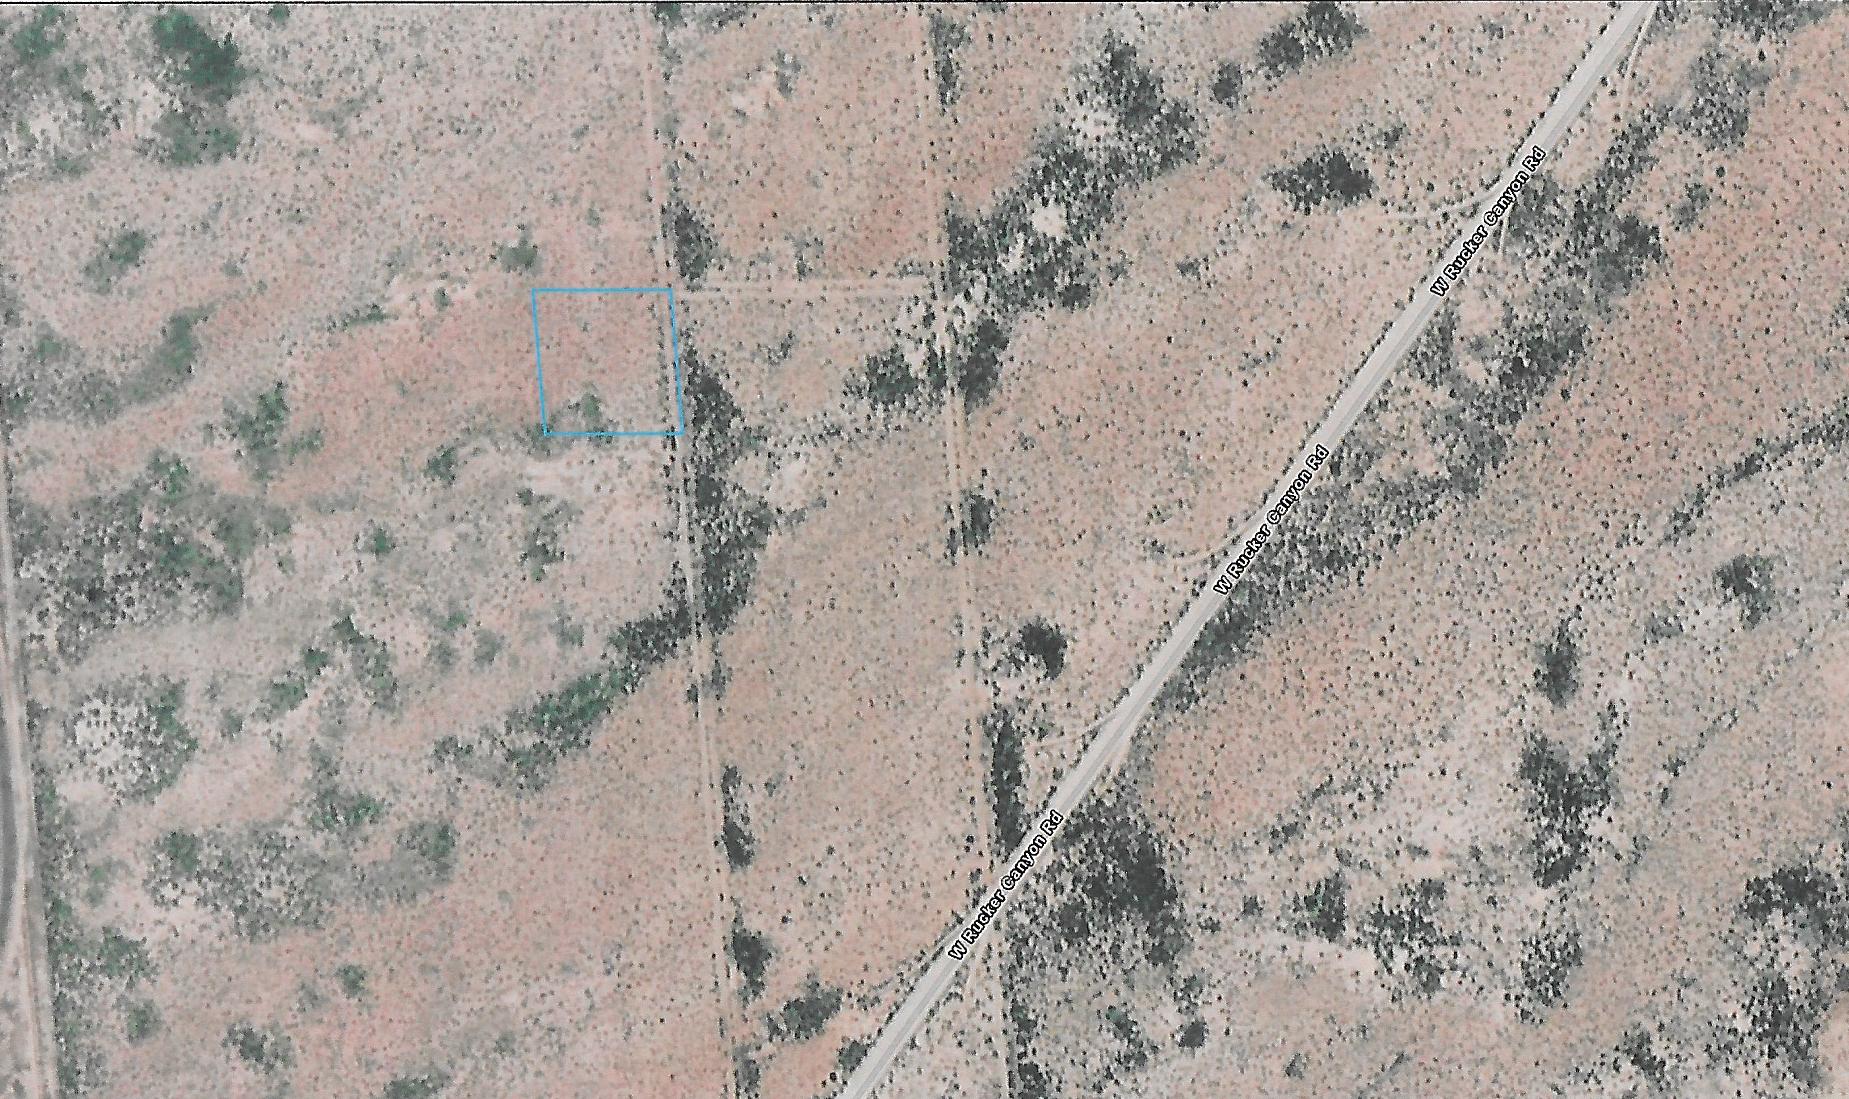 265-Acres-Sunsites-Ranches-Lot-265-Aerial-Map-Scan